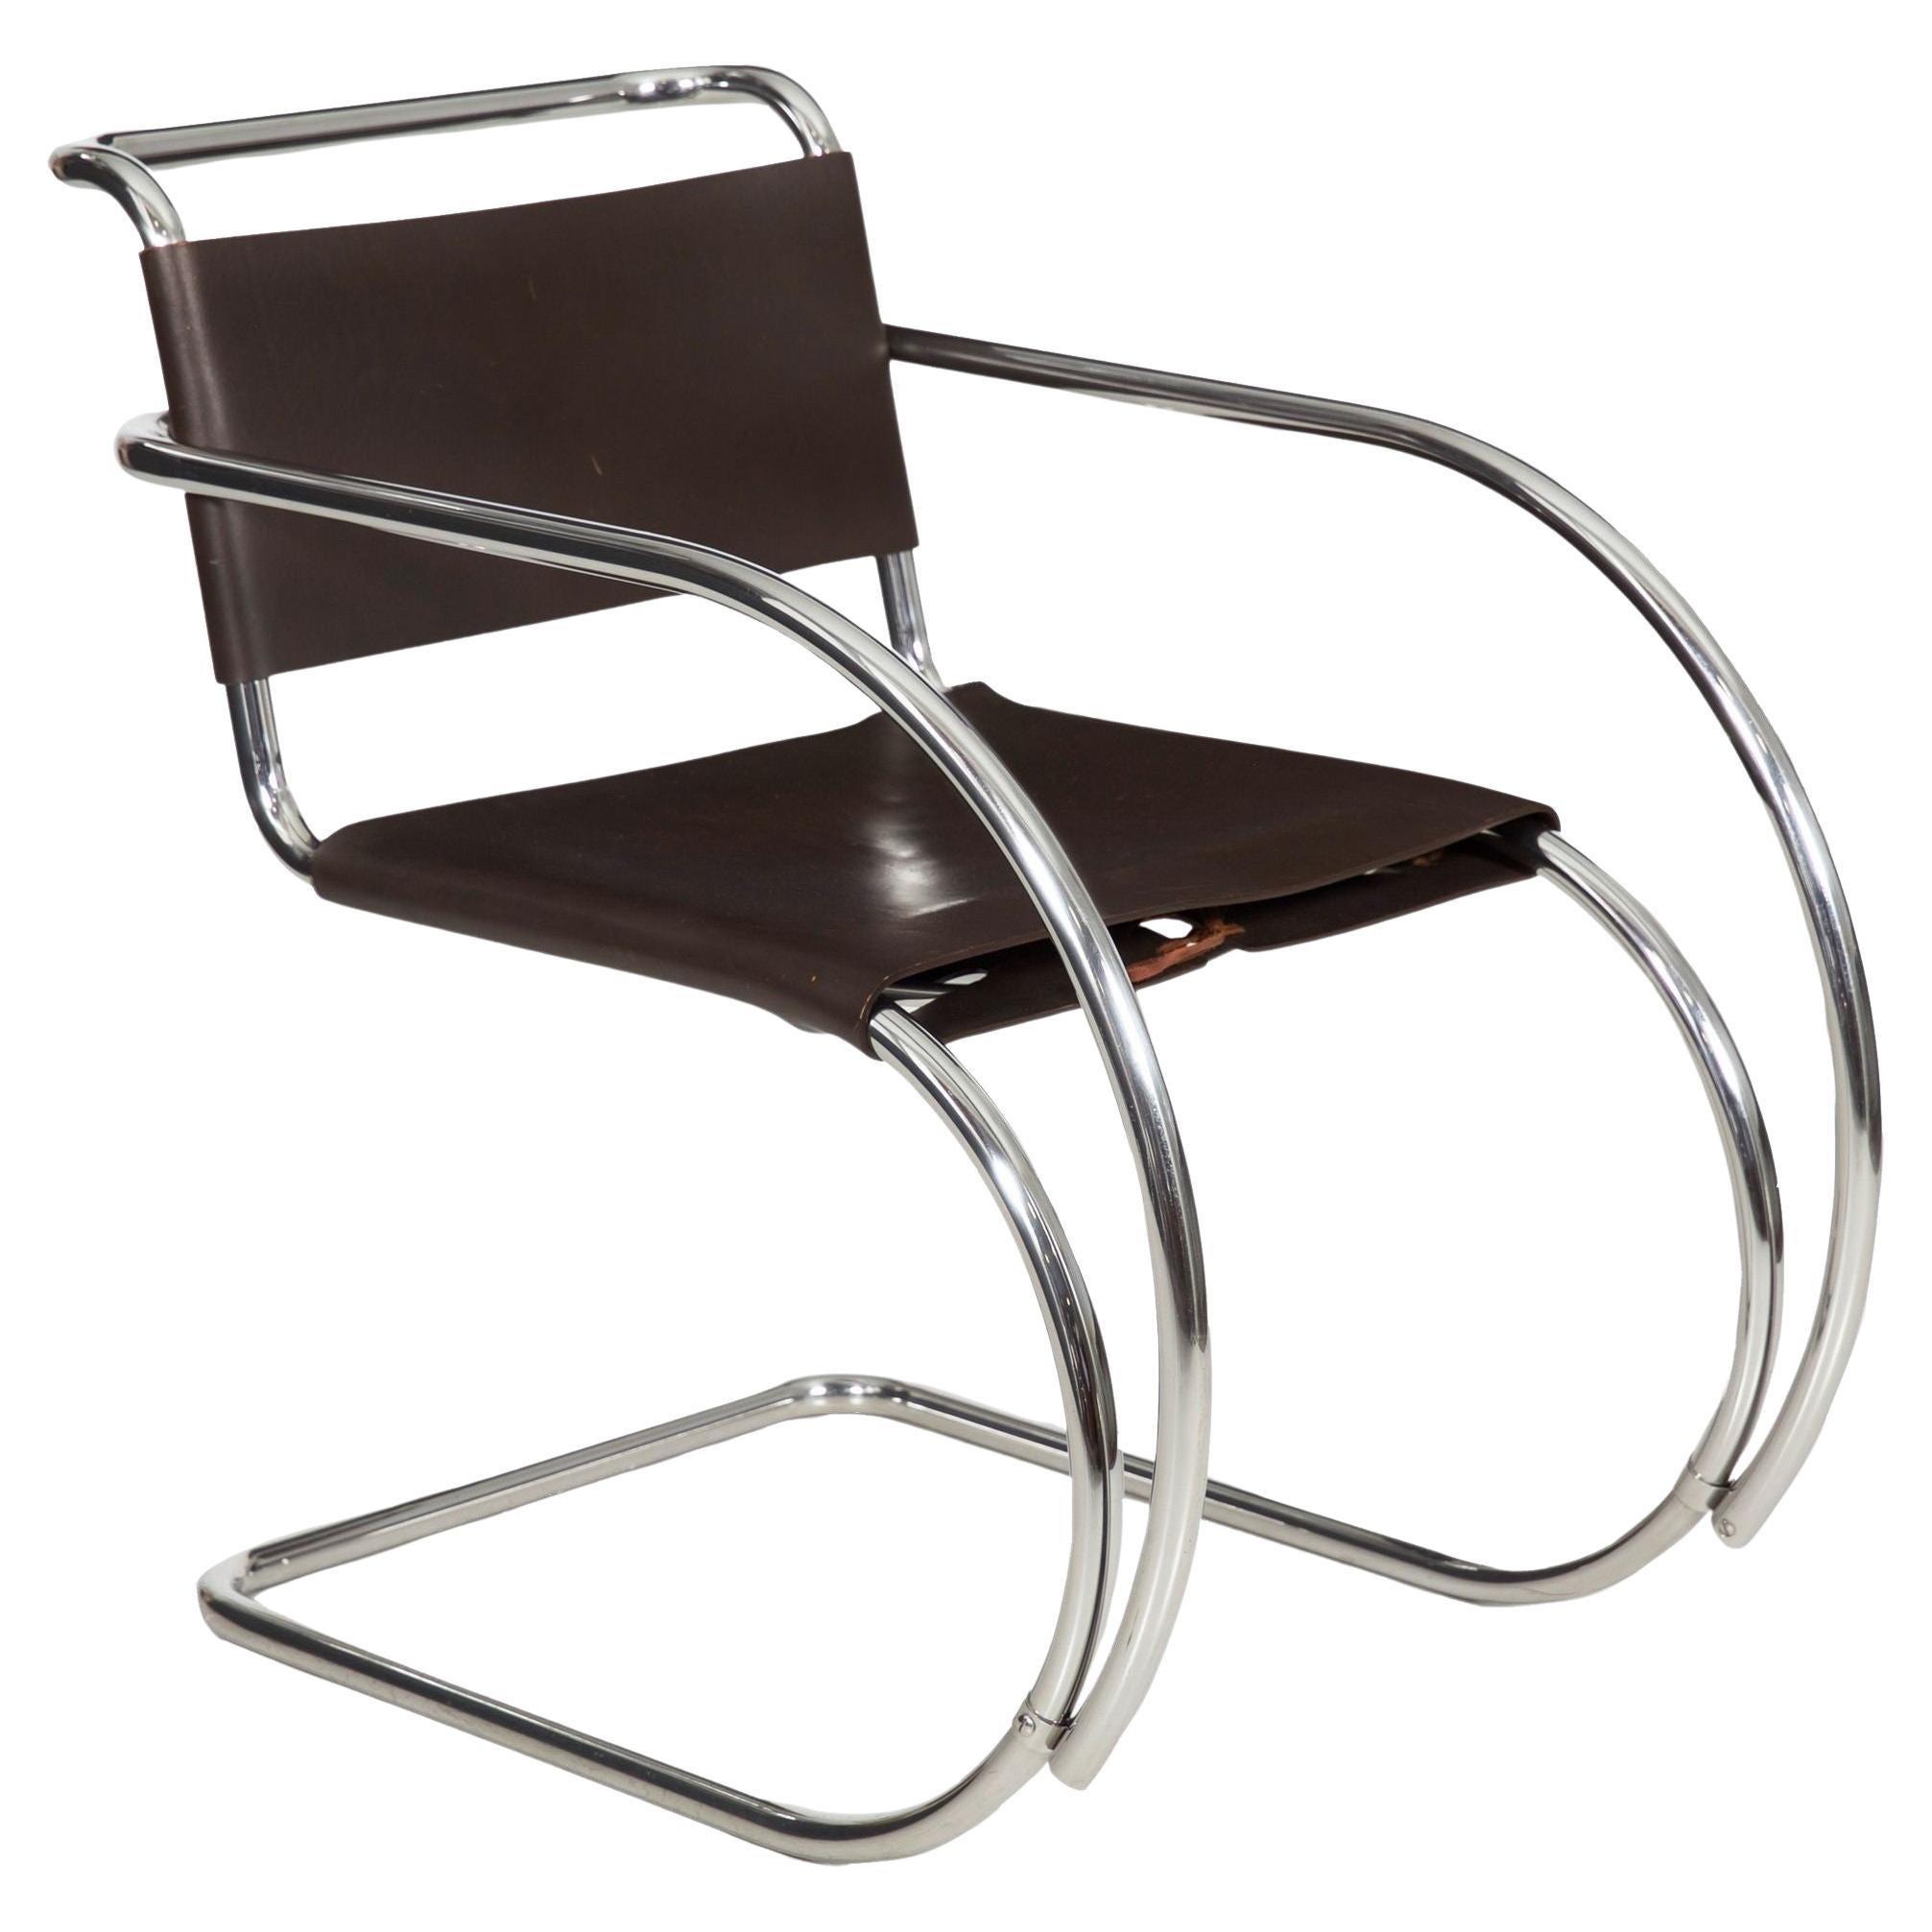 Vintage 1970s Mies van der Rohe MR20 Leather and Chrome Armchair For Sale